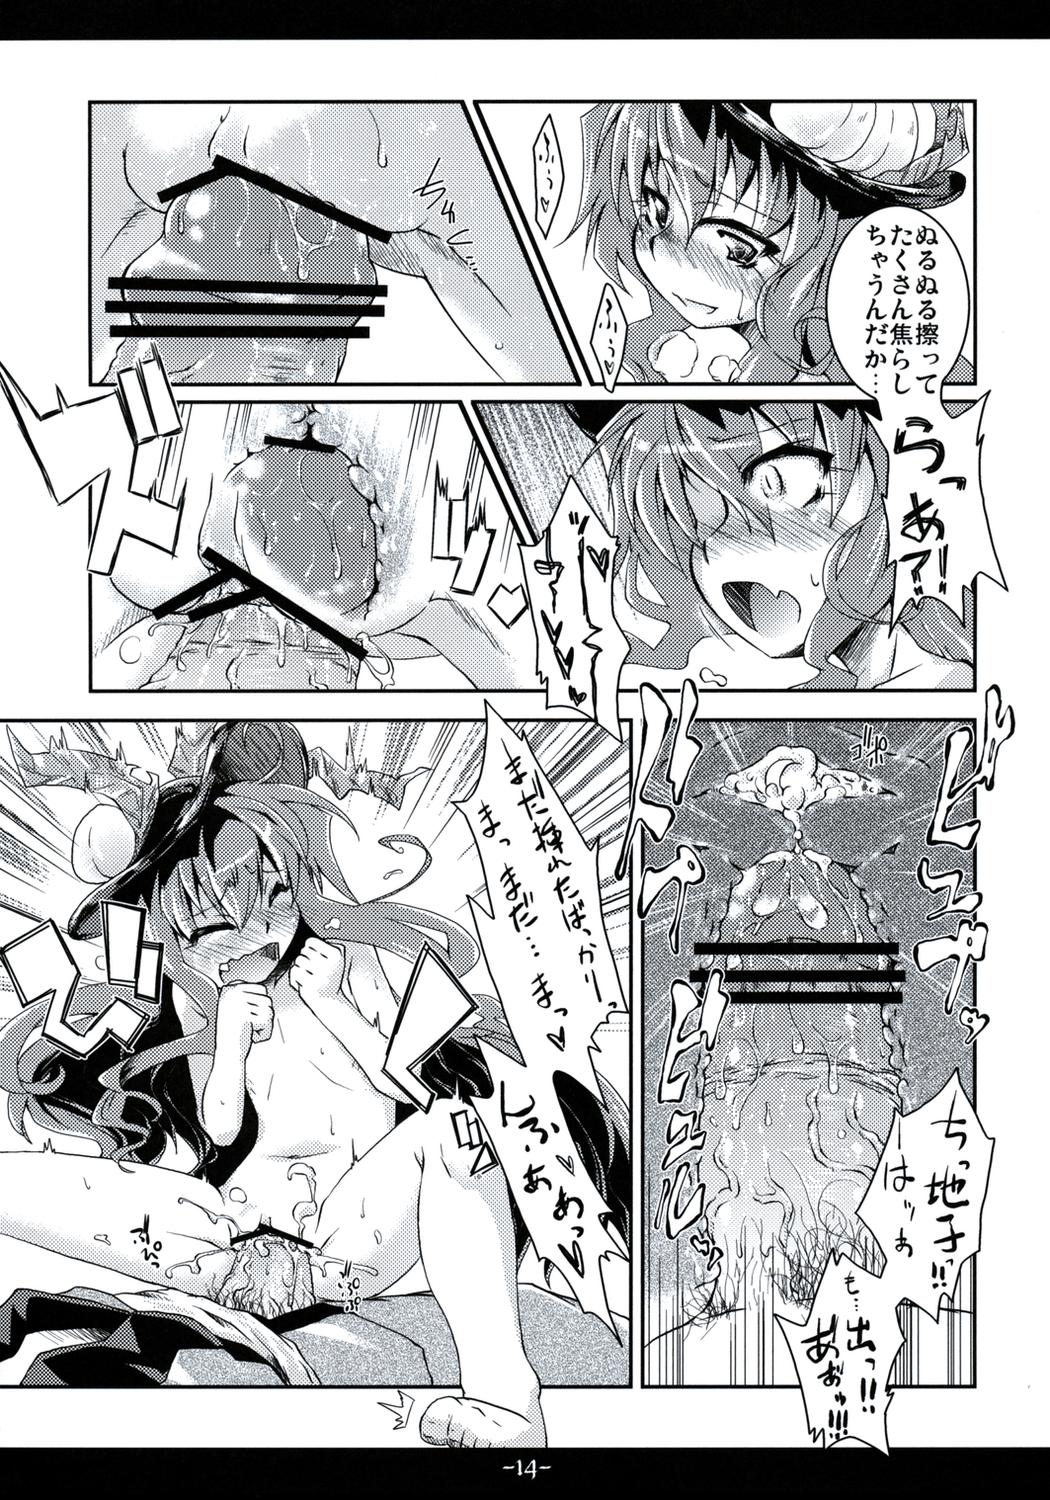 Spooning Full Full Full-Flat - Touhou project Solo Female - Page 13